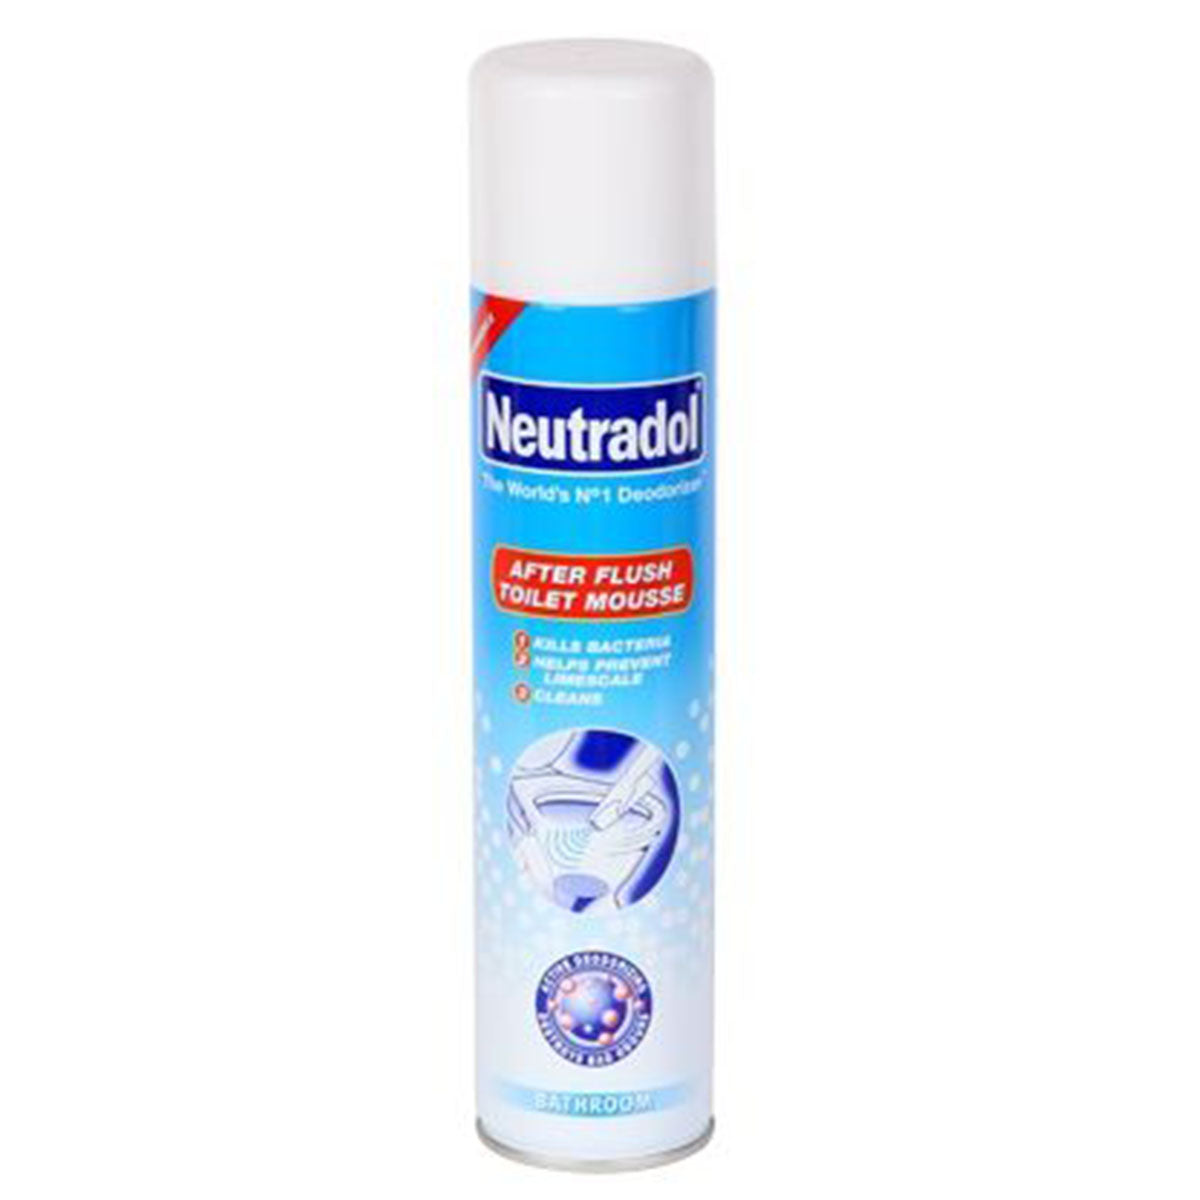 Neutradol - After Flush Toilet Mousse - 300ml - Continental Food Store